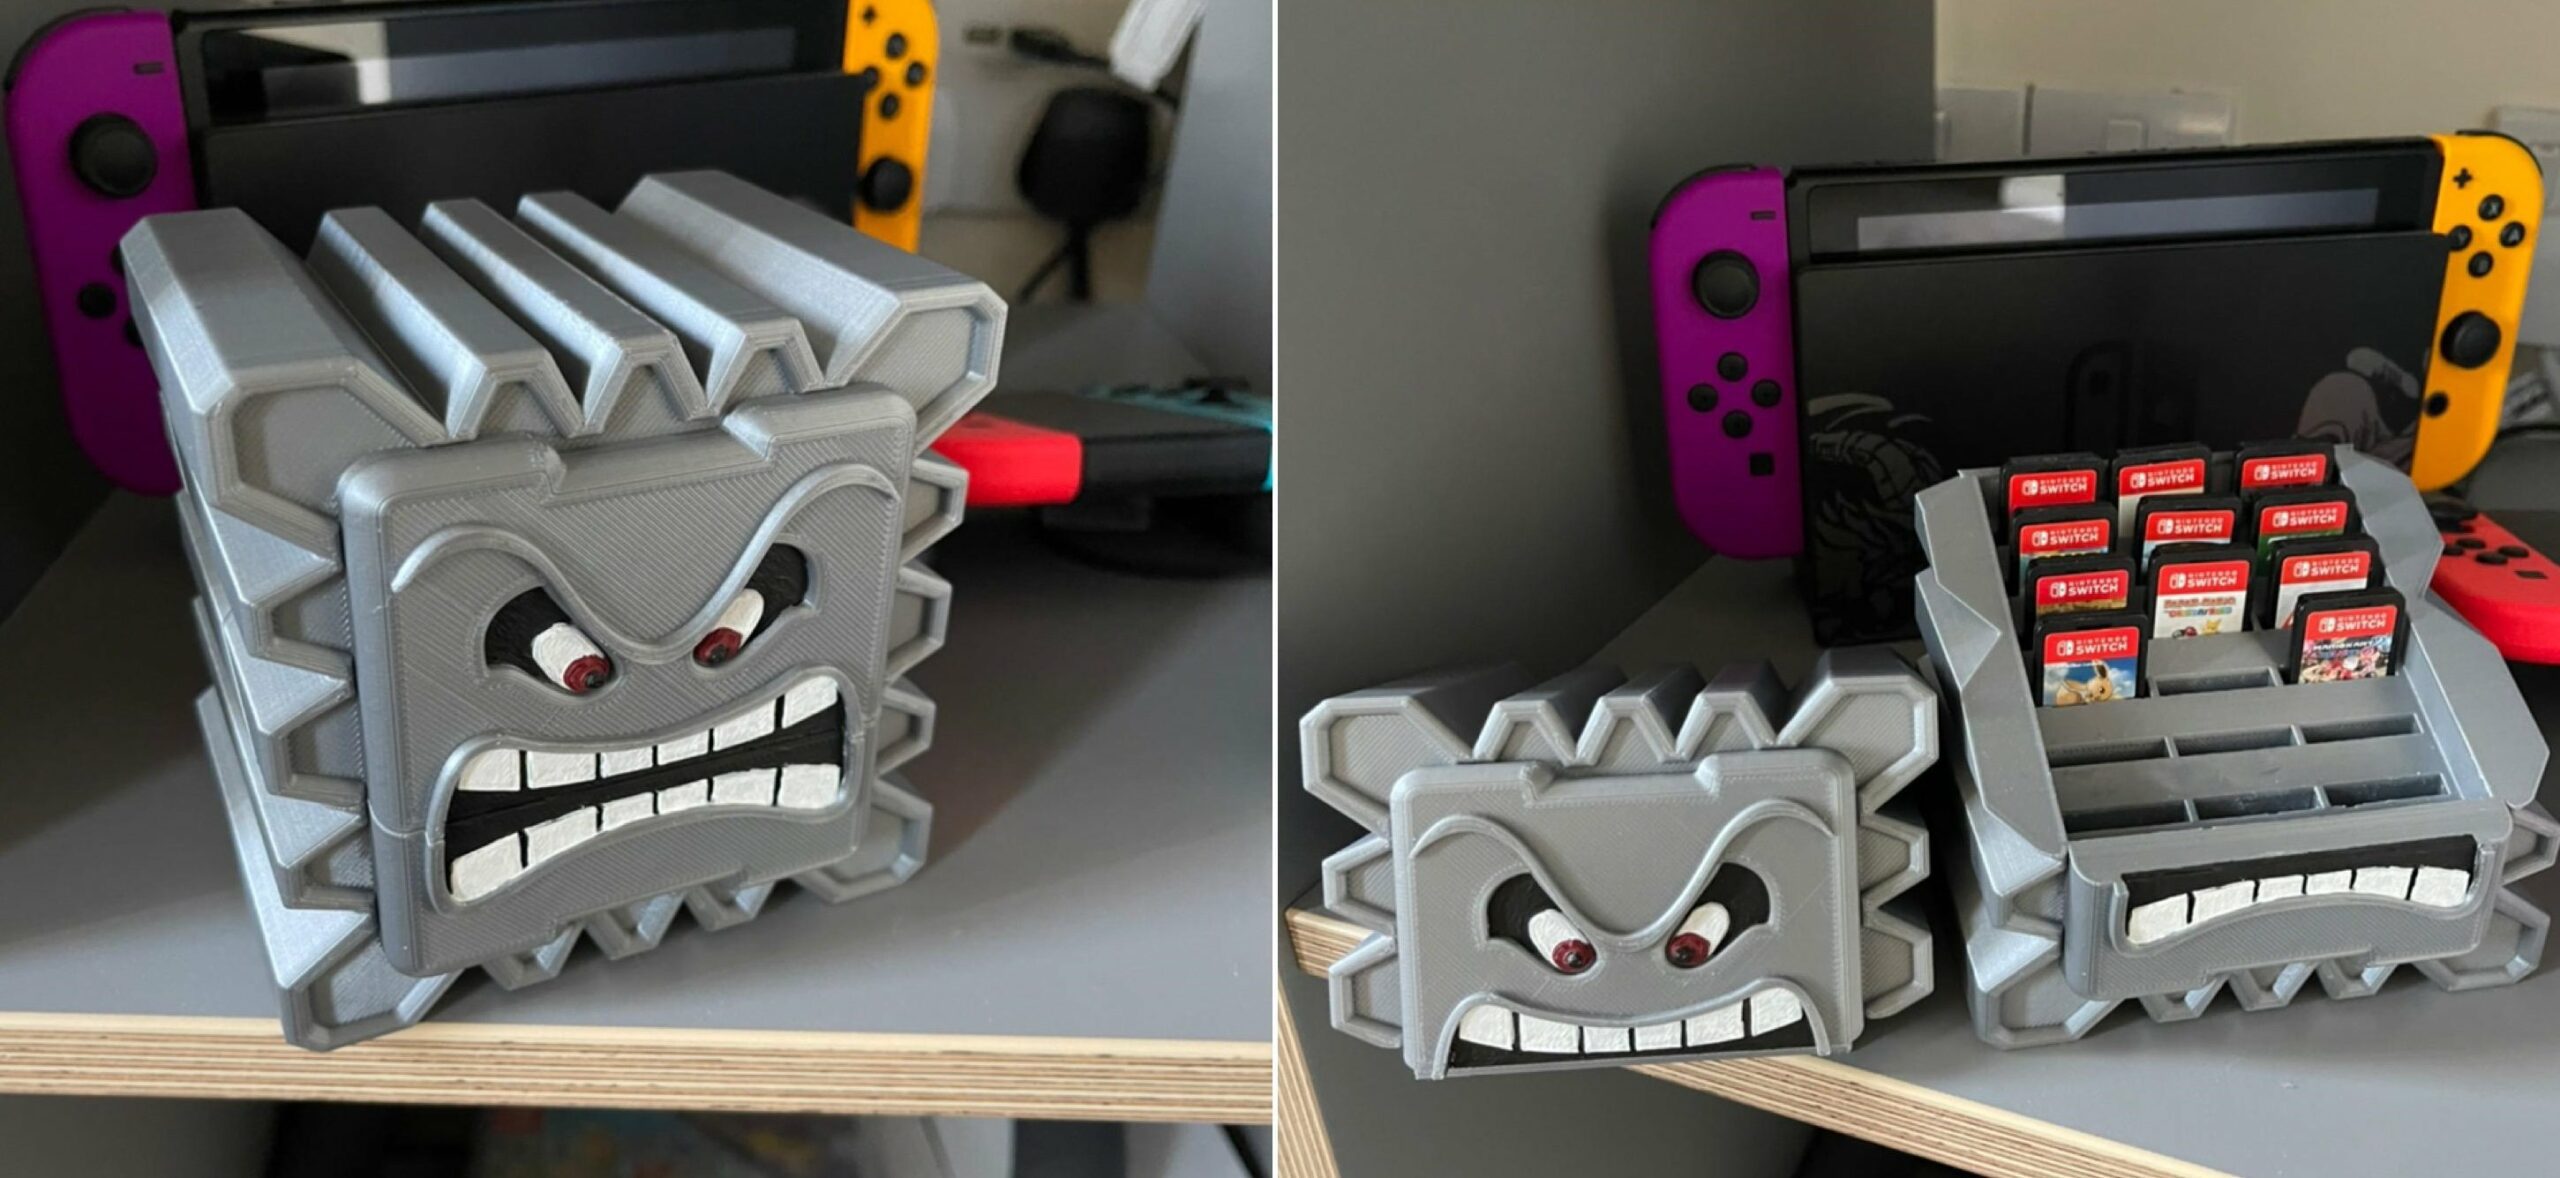 hierarki flyde Låse This 3D-printed Switch cartridge holder is the stuff of dreams – Destructoid